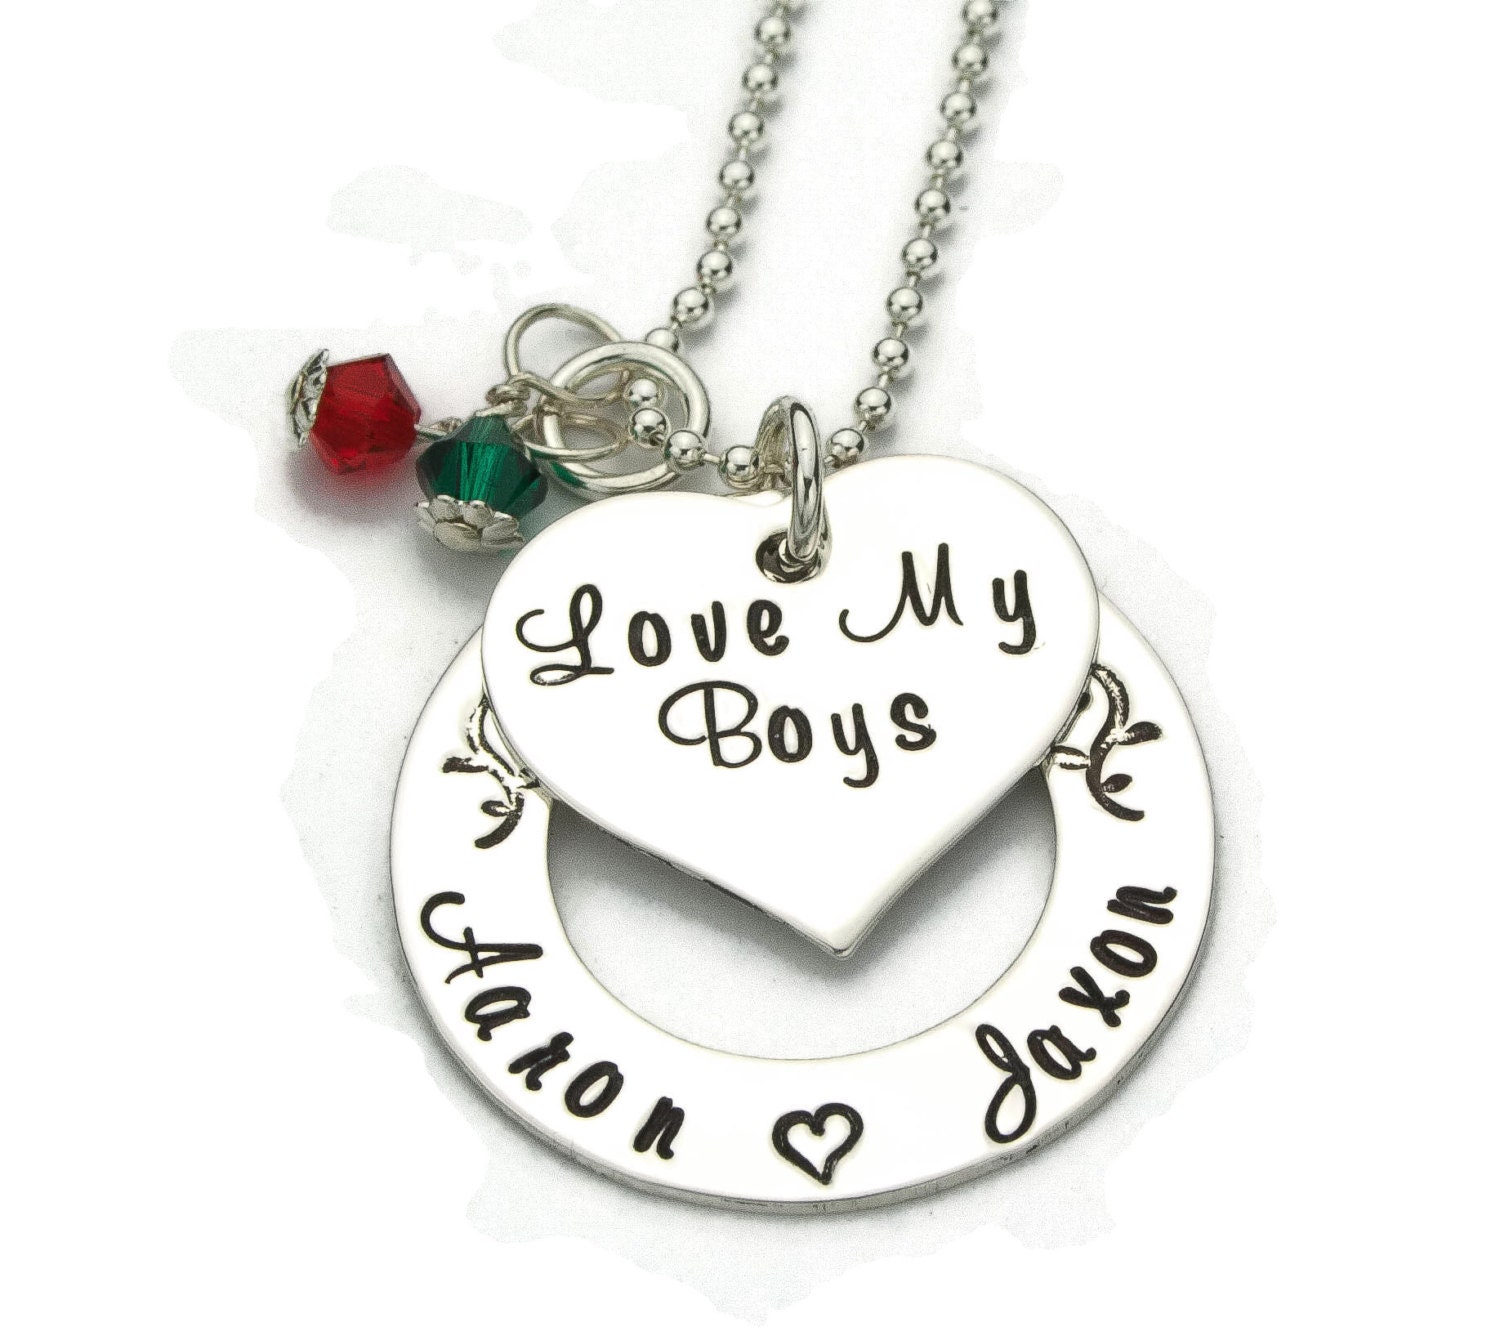 Custom Mothers Necklace, Personalized Necklace, Necklace for Mom, Childrens Names and Birthstones, Sterling Silver, Gift Idea for Mom